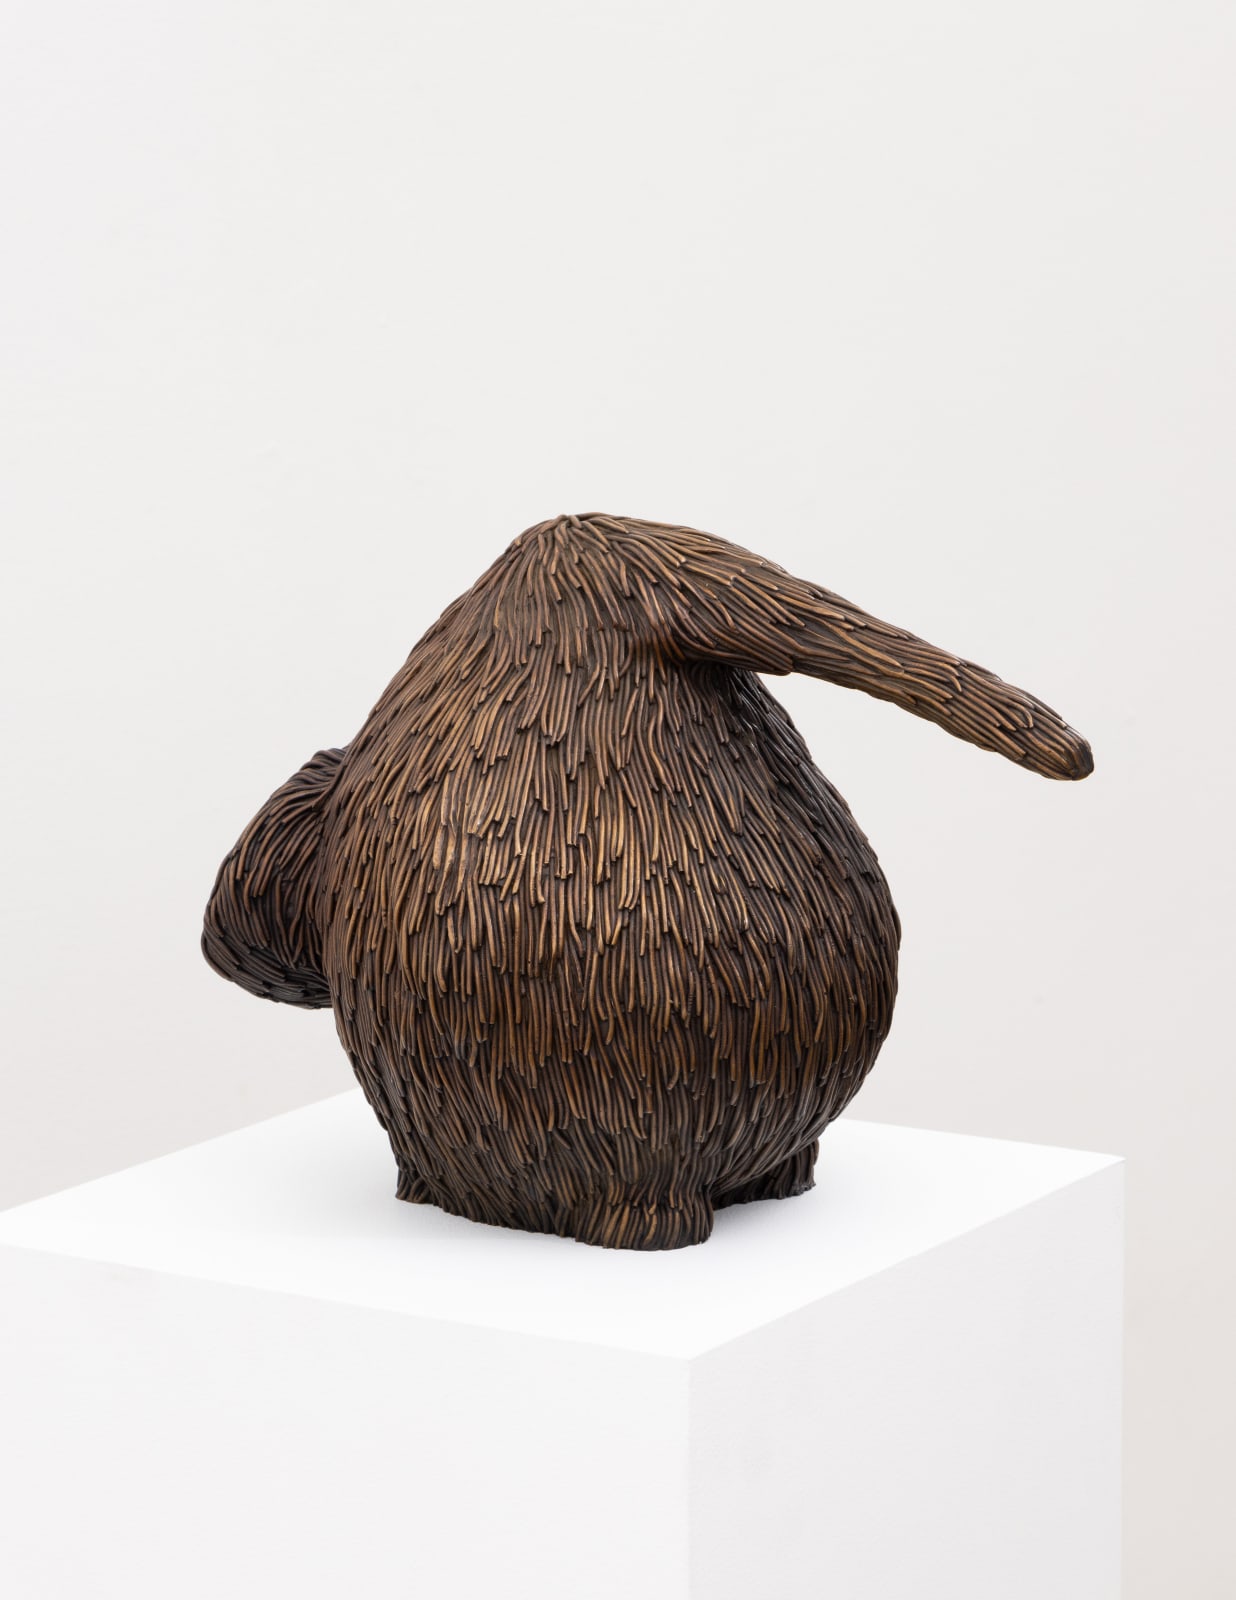 Free-standing bronze sculpture of a form resembling a kiwi with a long beak. The sculpture is cast with a surface texture resembling shaggy hair and treated with a golden brown patina. 